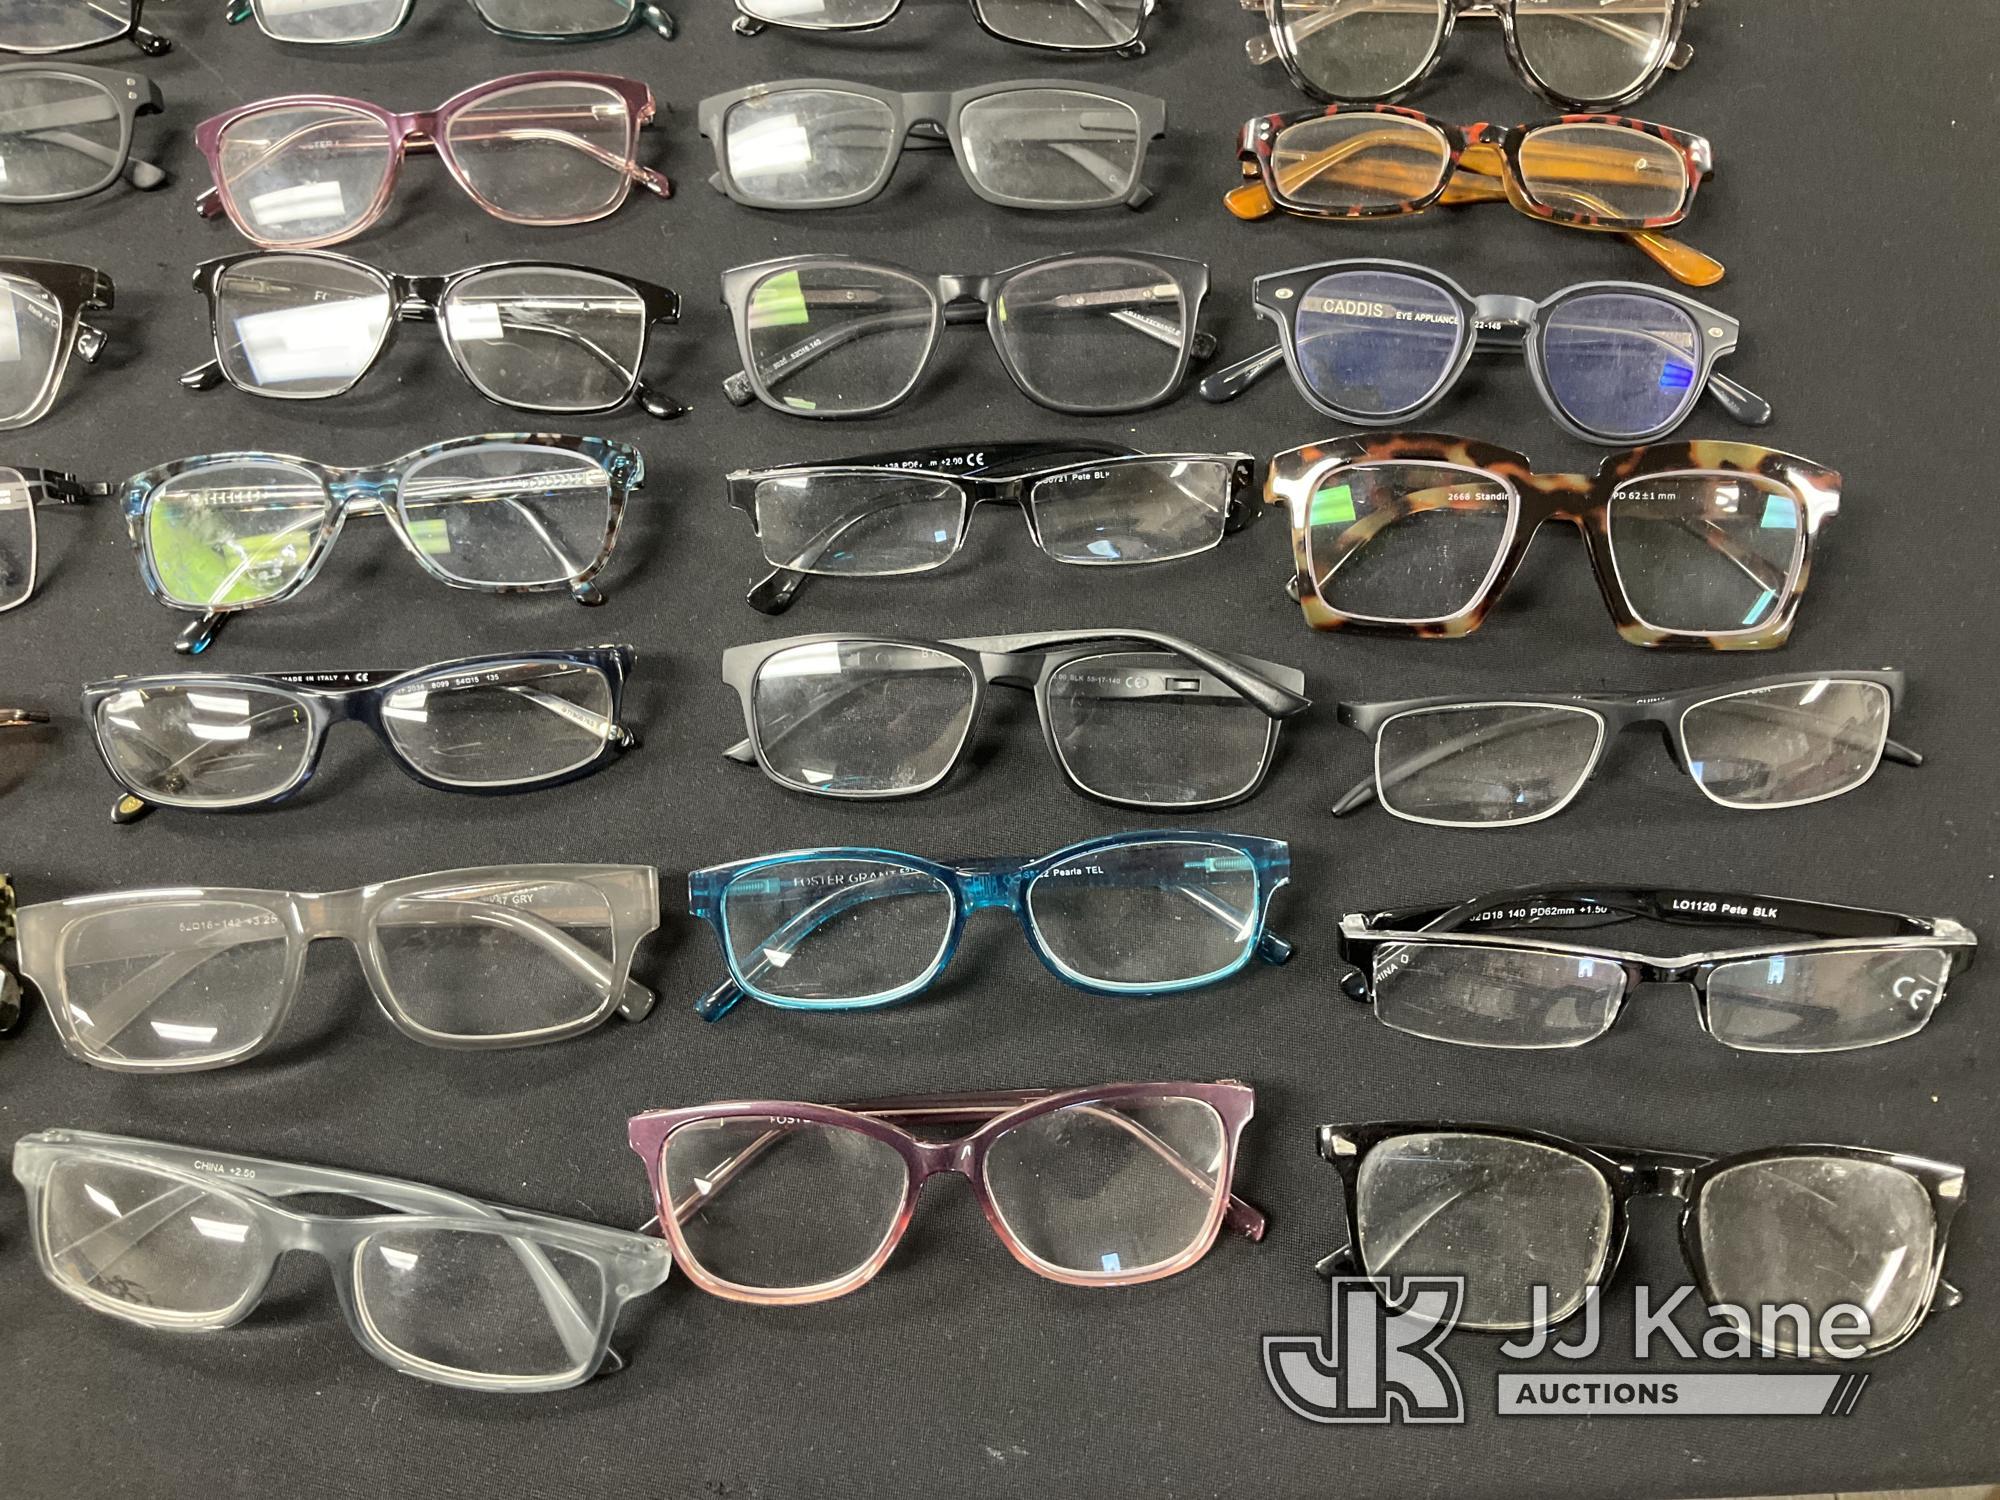 (Jurupa Valley, CA) Eye Glasses (Used) NOTE: This unit is being sold AS IS/WHERE IS via Timed Auctio